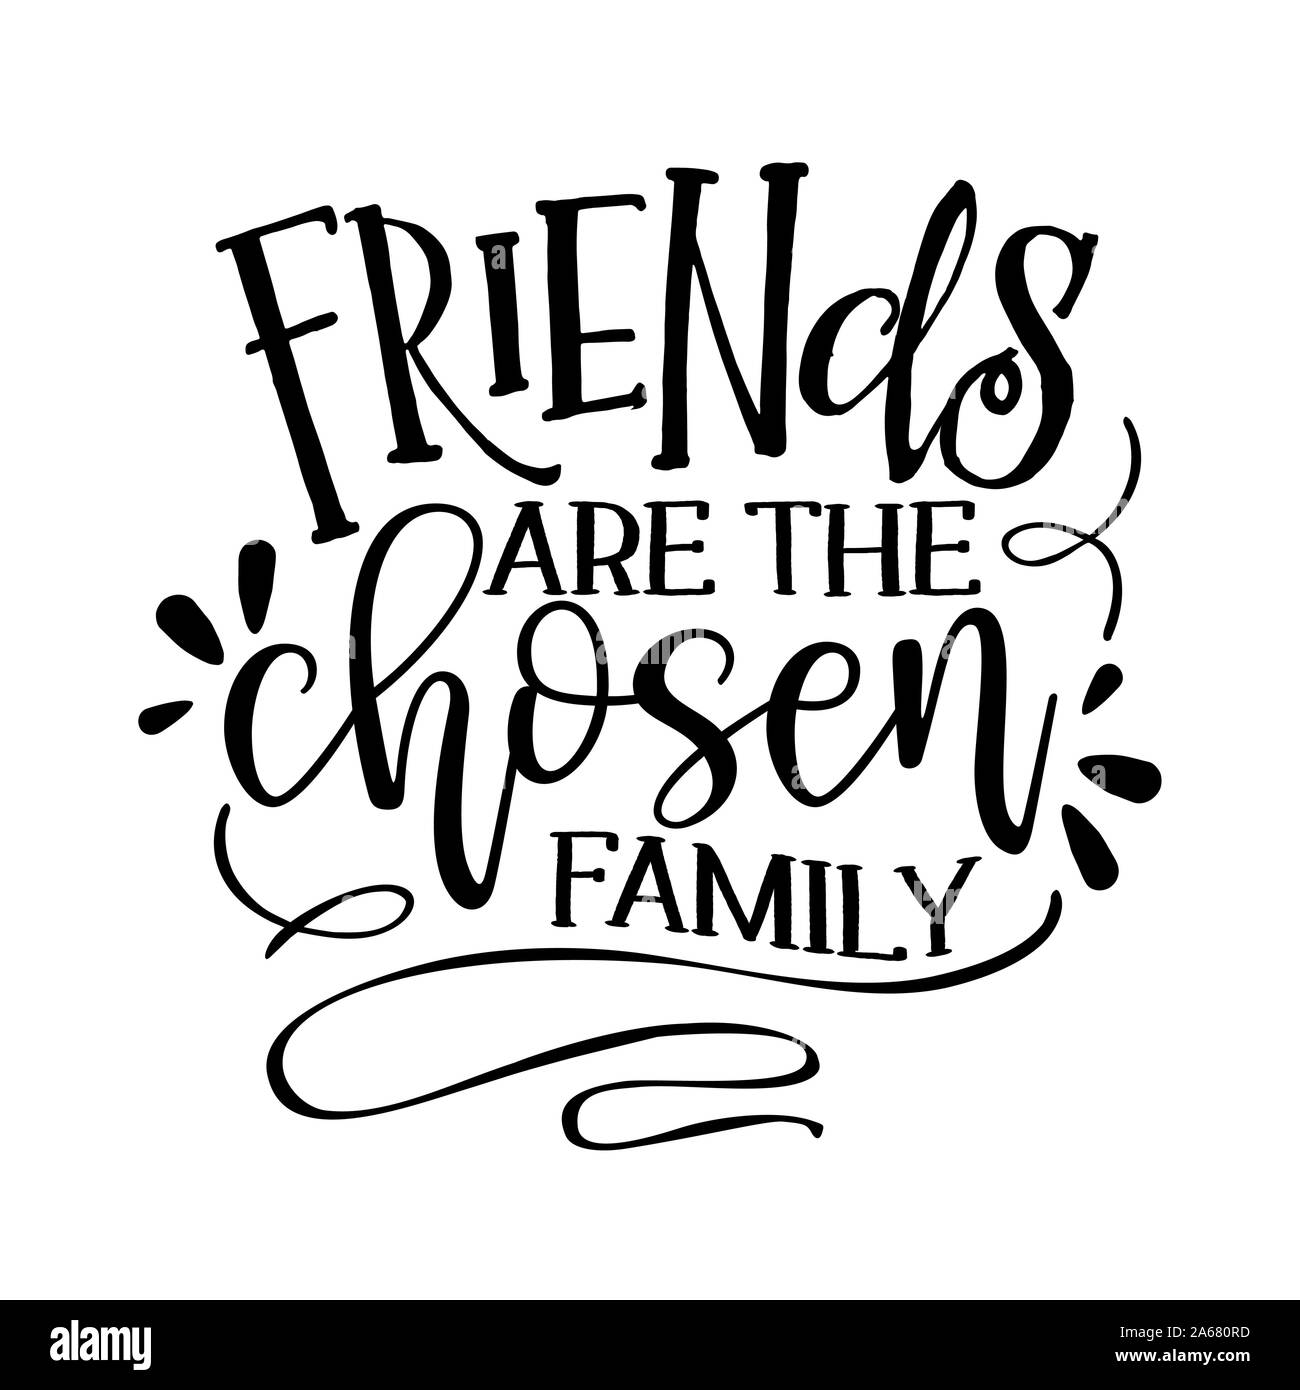 Friendship Quotes Stock Photos - 24,948 Images